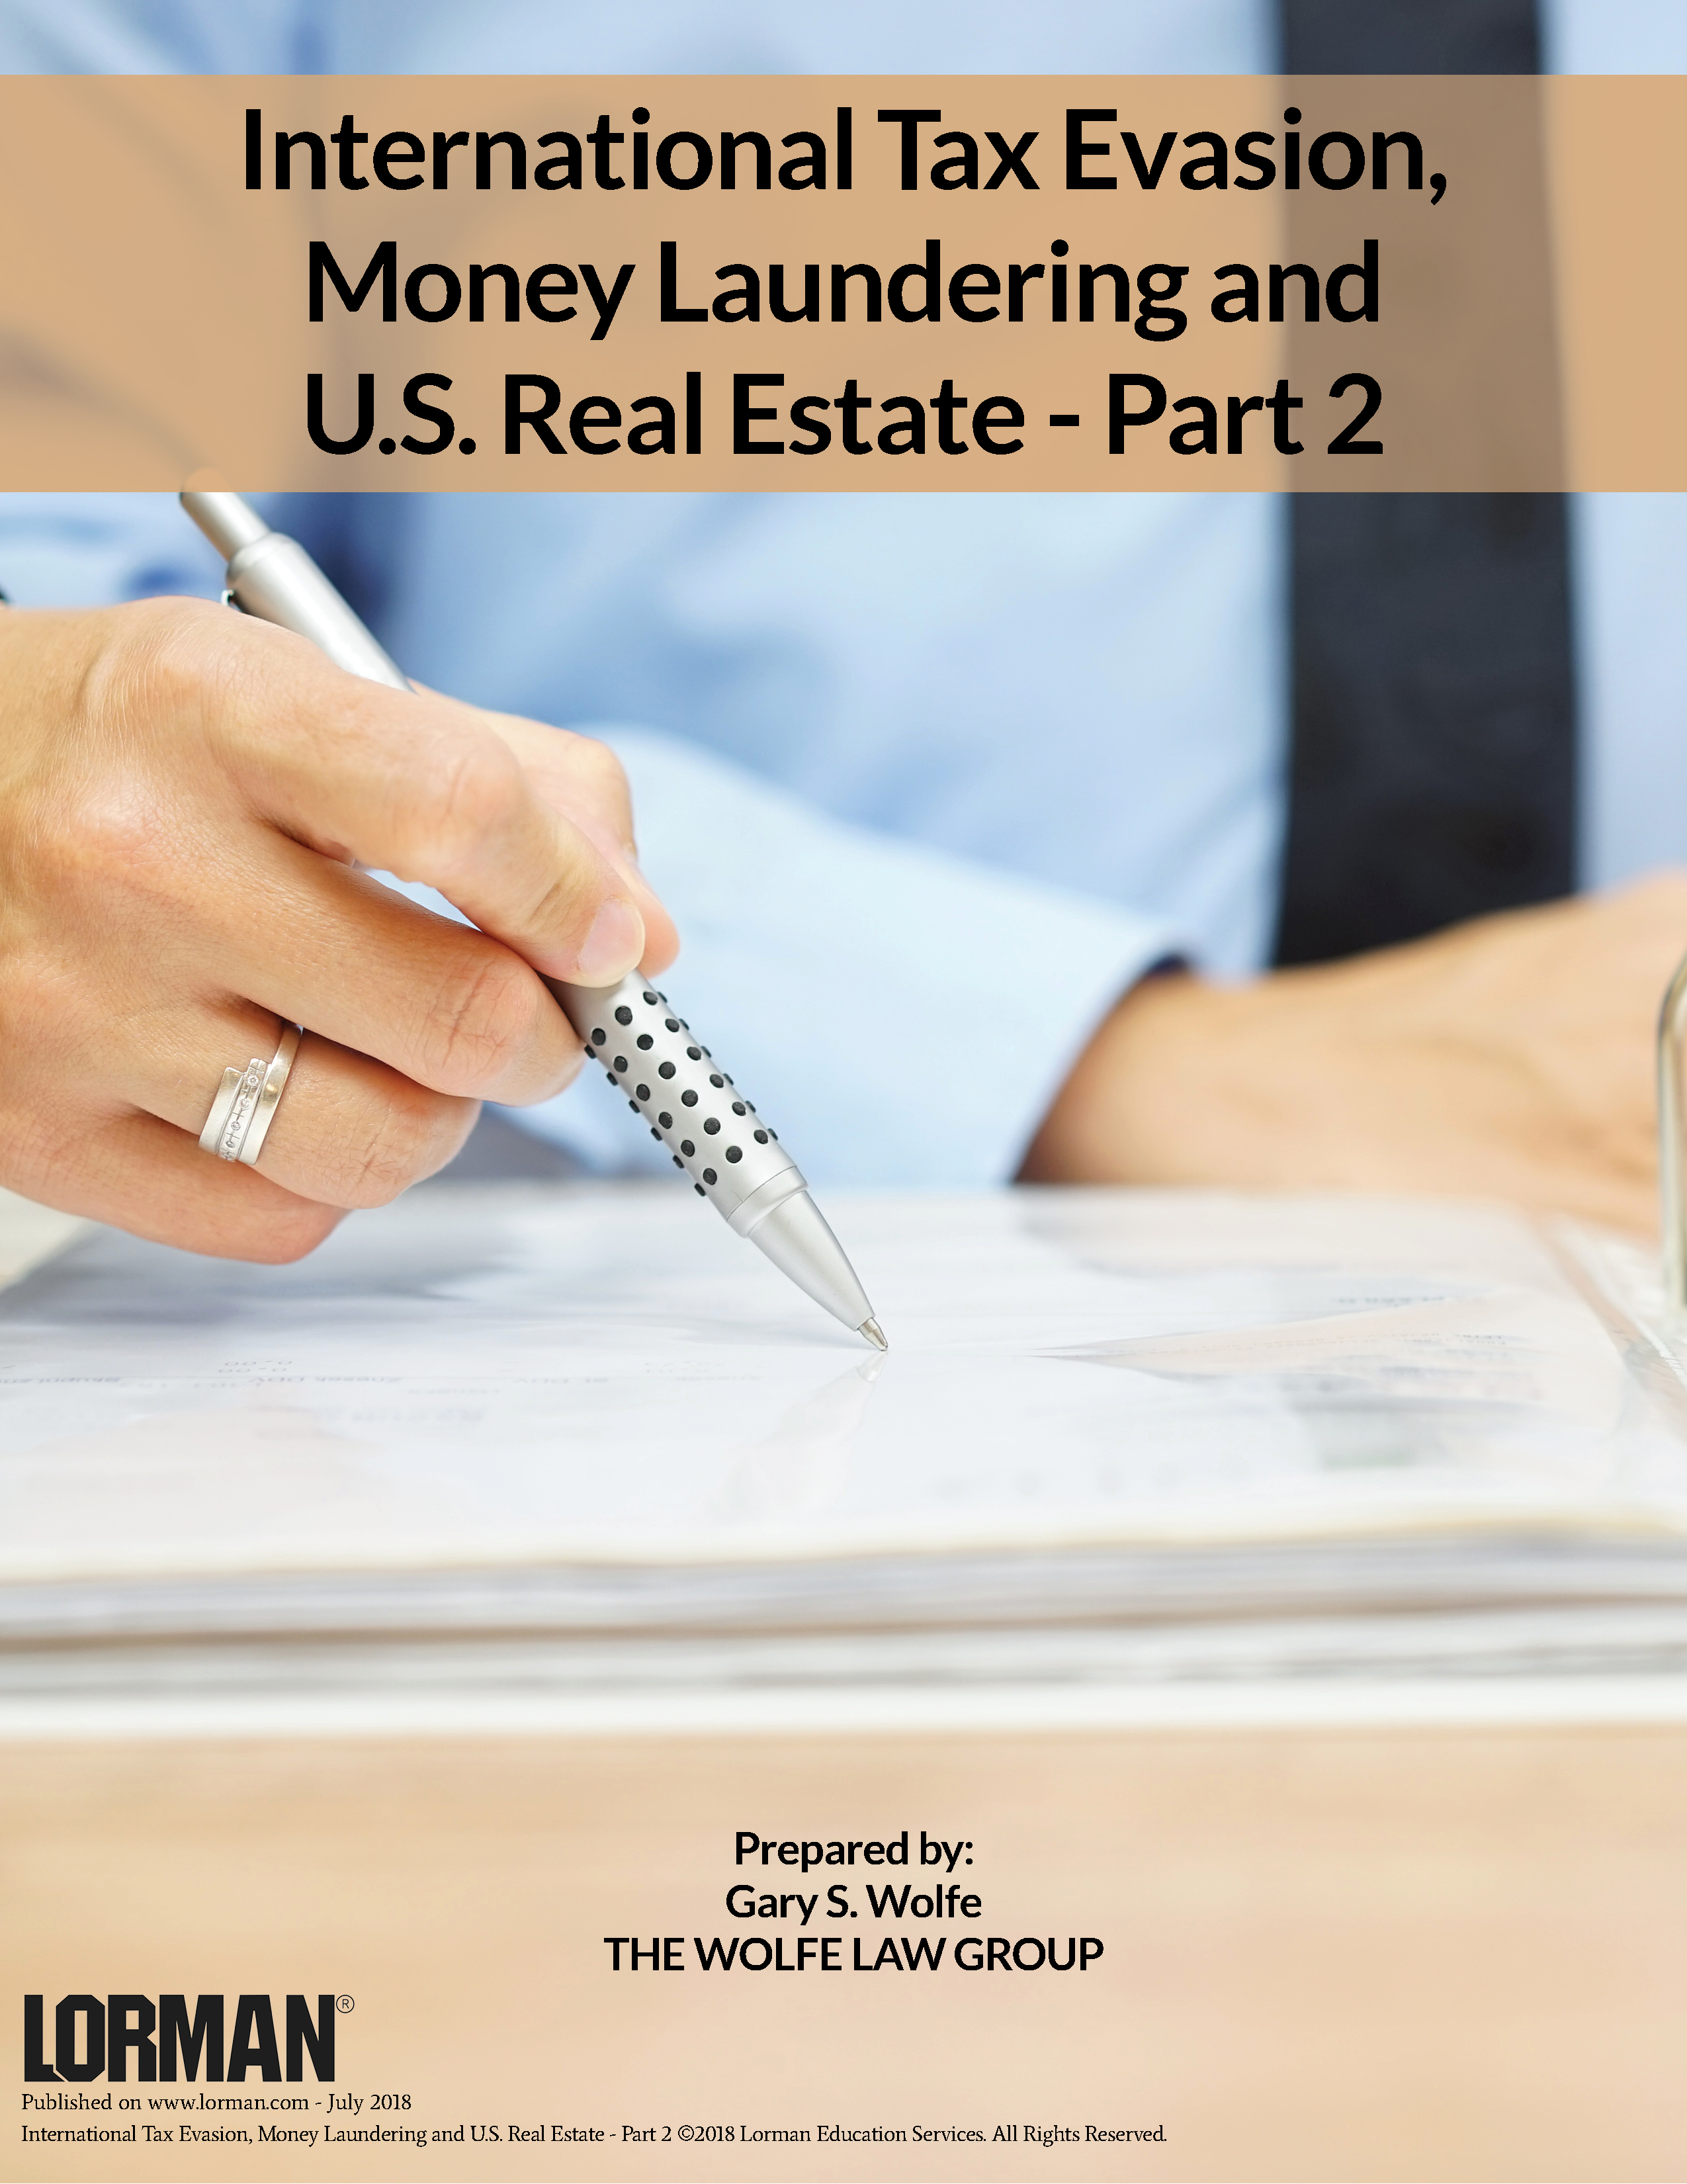 International Tax Evasion, Money Laundering and U.S. Real Estate - Part 2